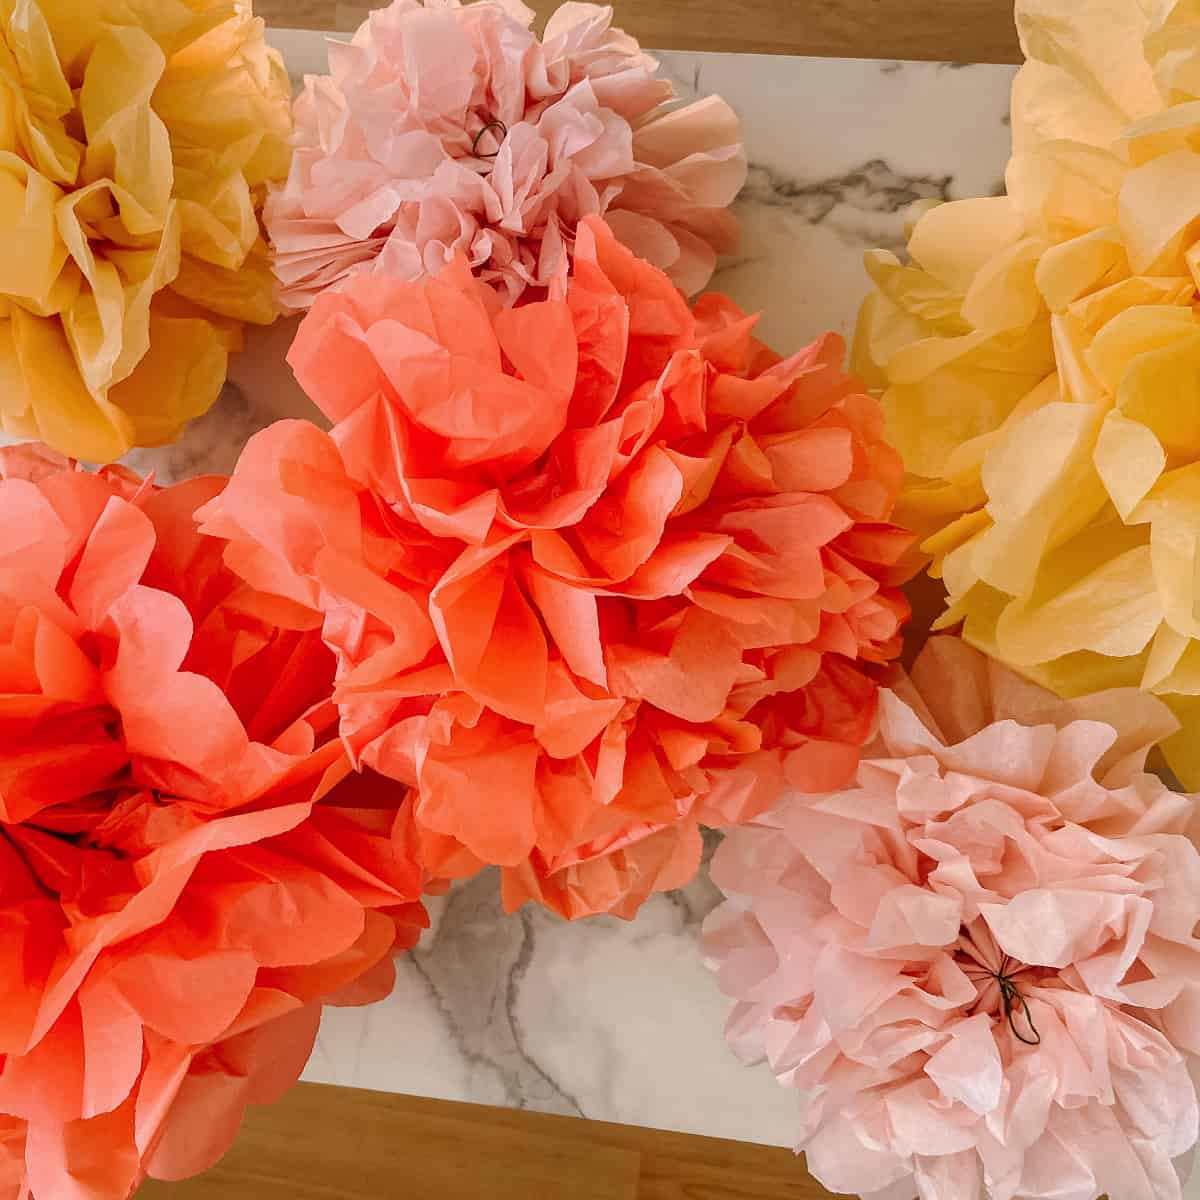 How To Make Tissue Paper Pom Poms Thoughtfully Simple